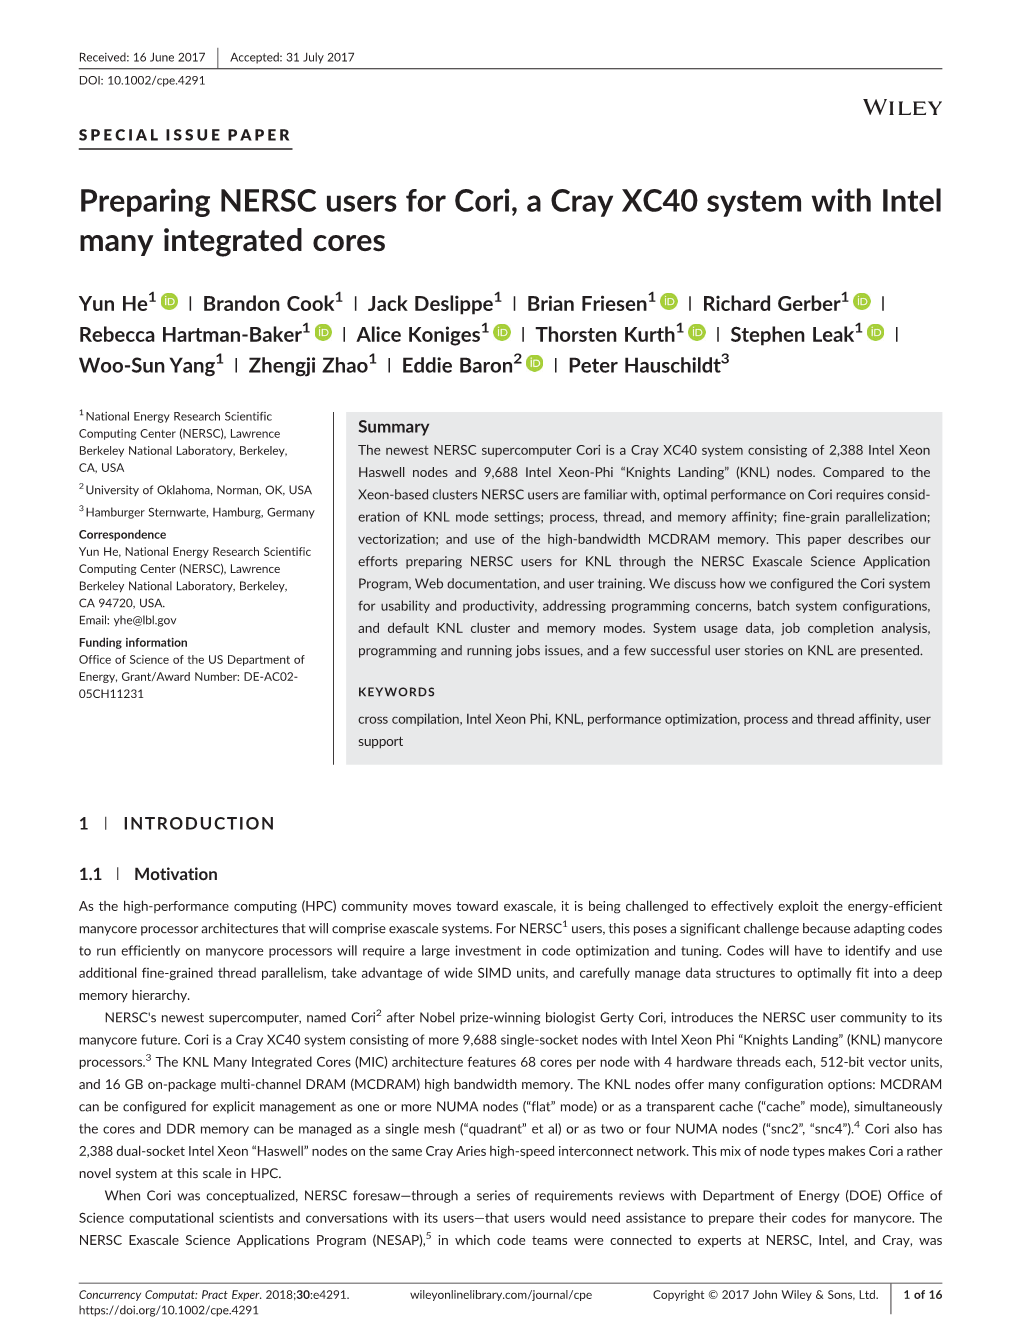 Preparing NERSC Users for Cori, a Cray XC40 System with Intel Many Integrated Cores